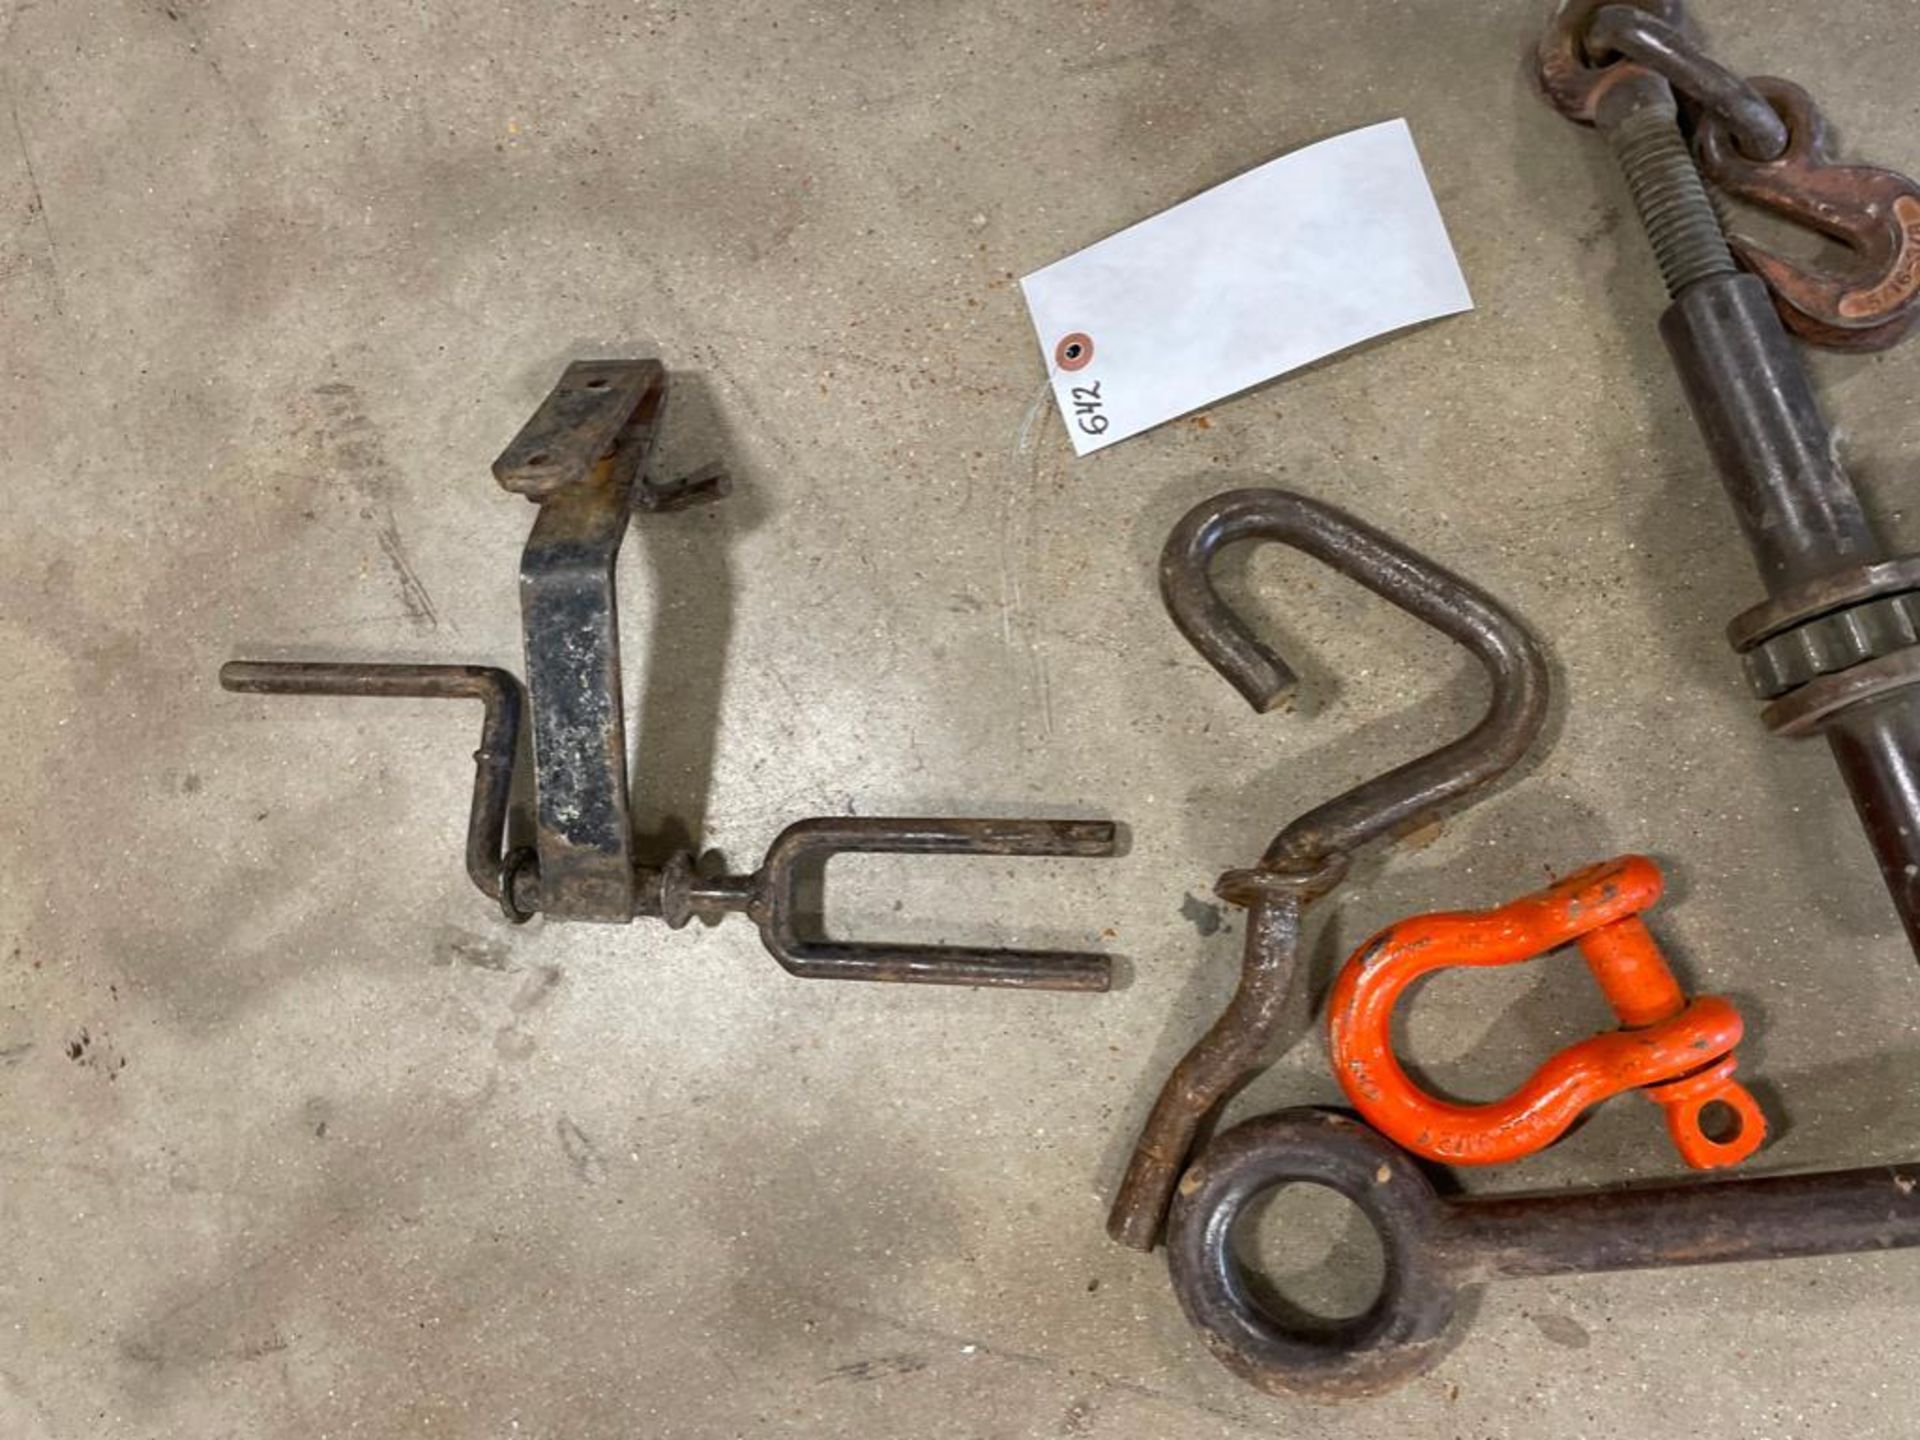 Miscellaneous, Ratchet Binder, Anchar Shackle, Etc.  Located in Hazelwood, MO - Image 4 of 5